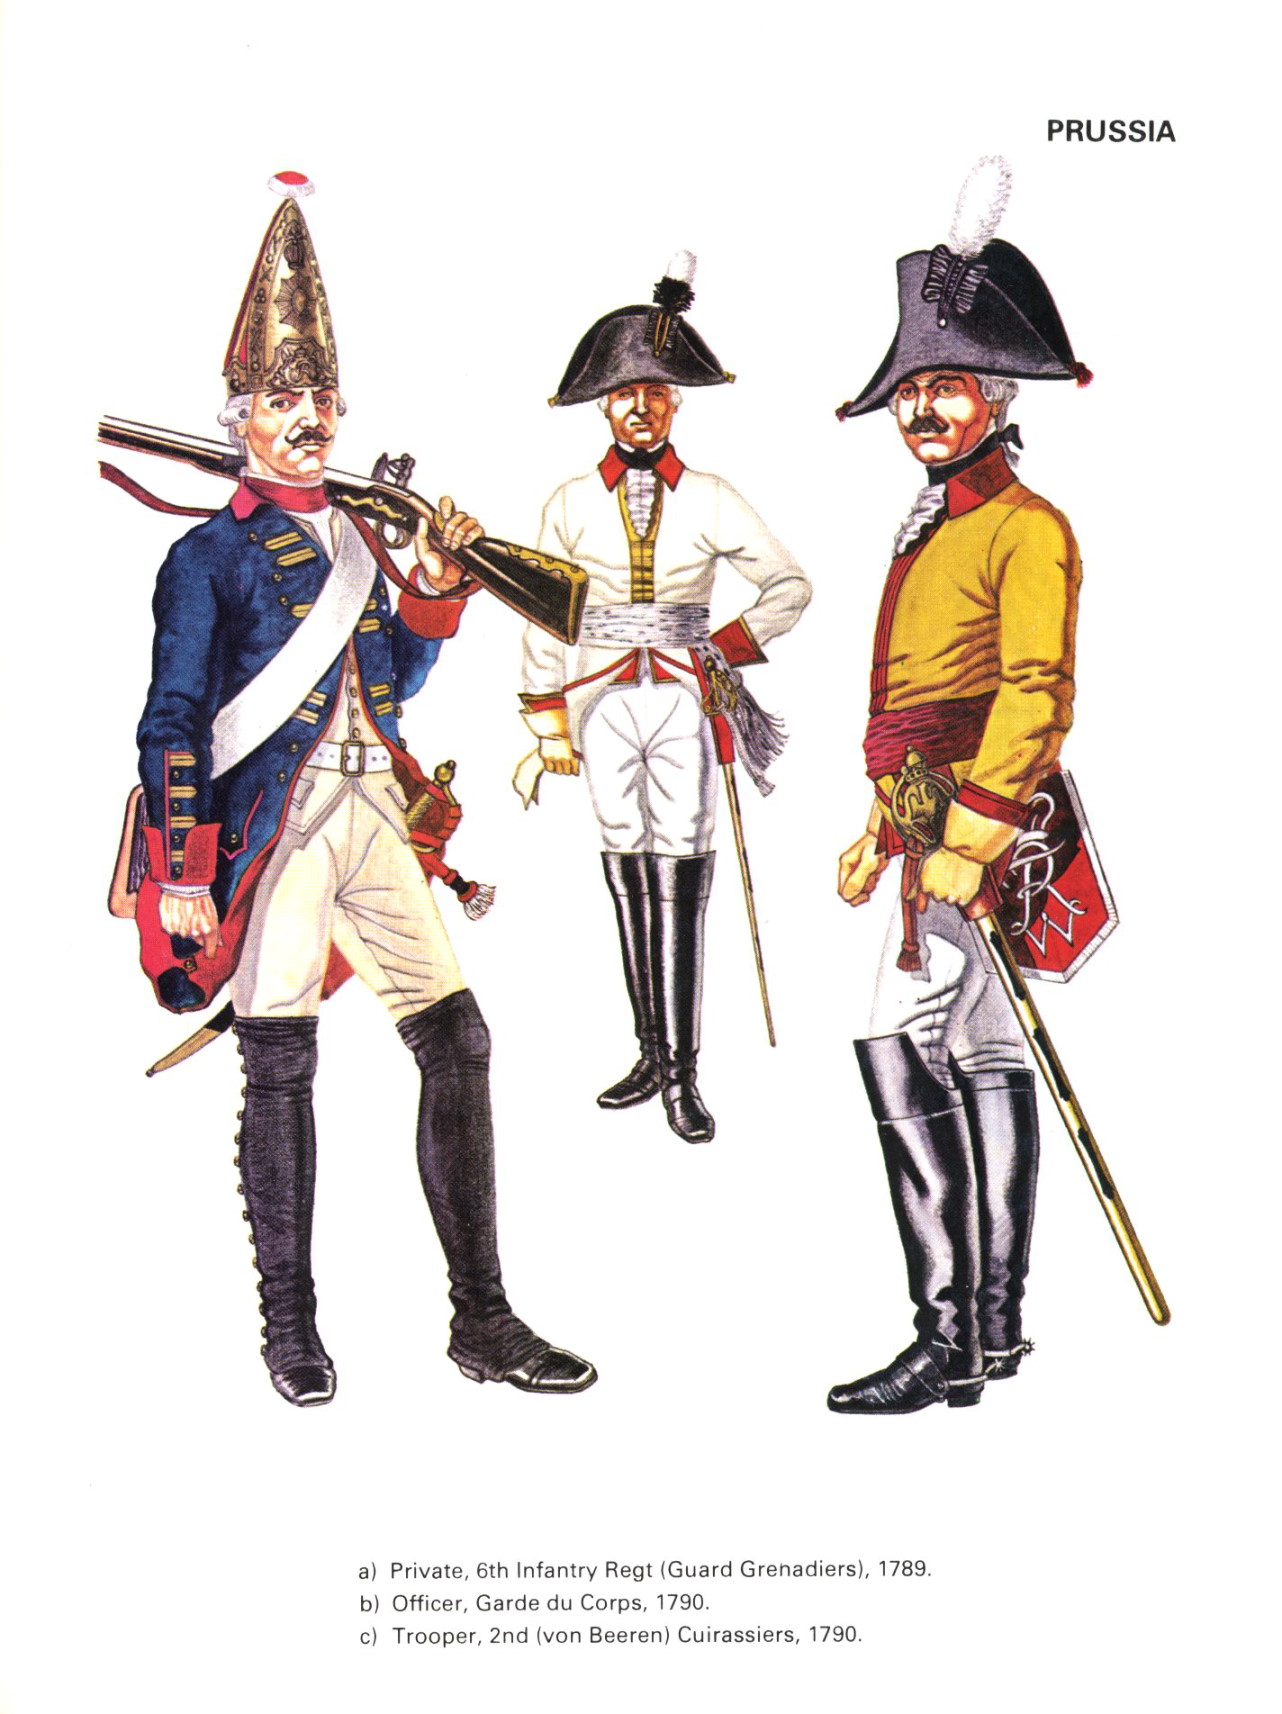 The Prussian army and the armed forces of revolutionary France